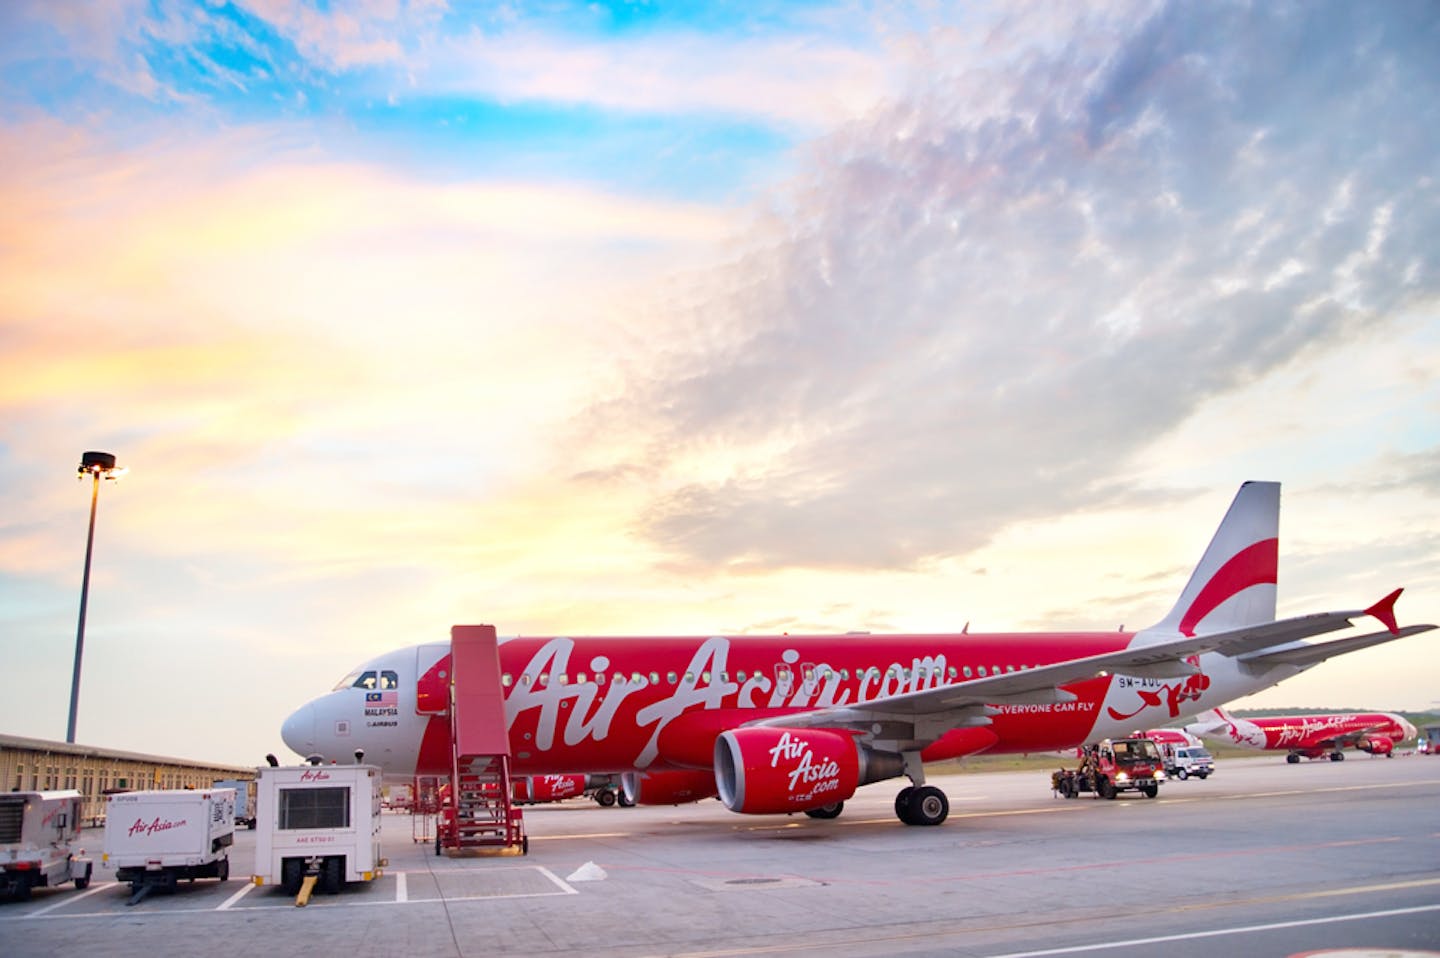 Could climate change have played a role in the AirAsia crash?  Opinion